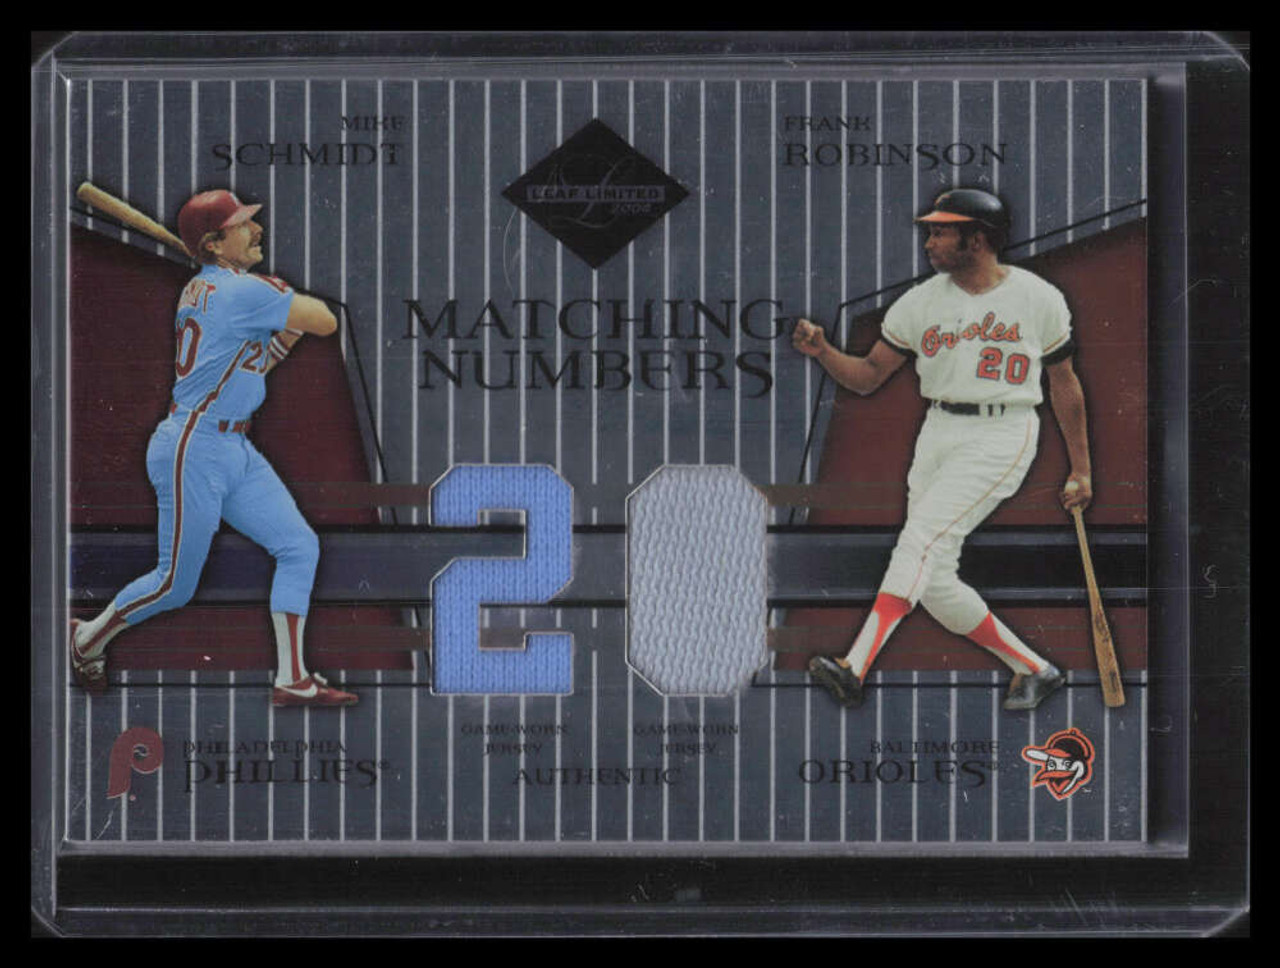 2004 Leaf Limited Matching Numbers 8 Frank Robinson Schmidt Dual